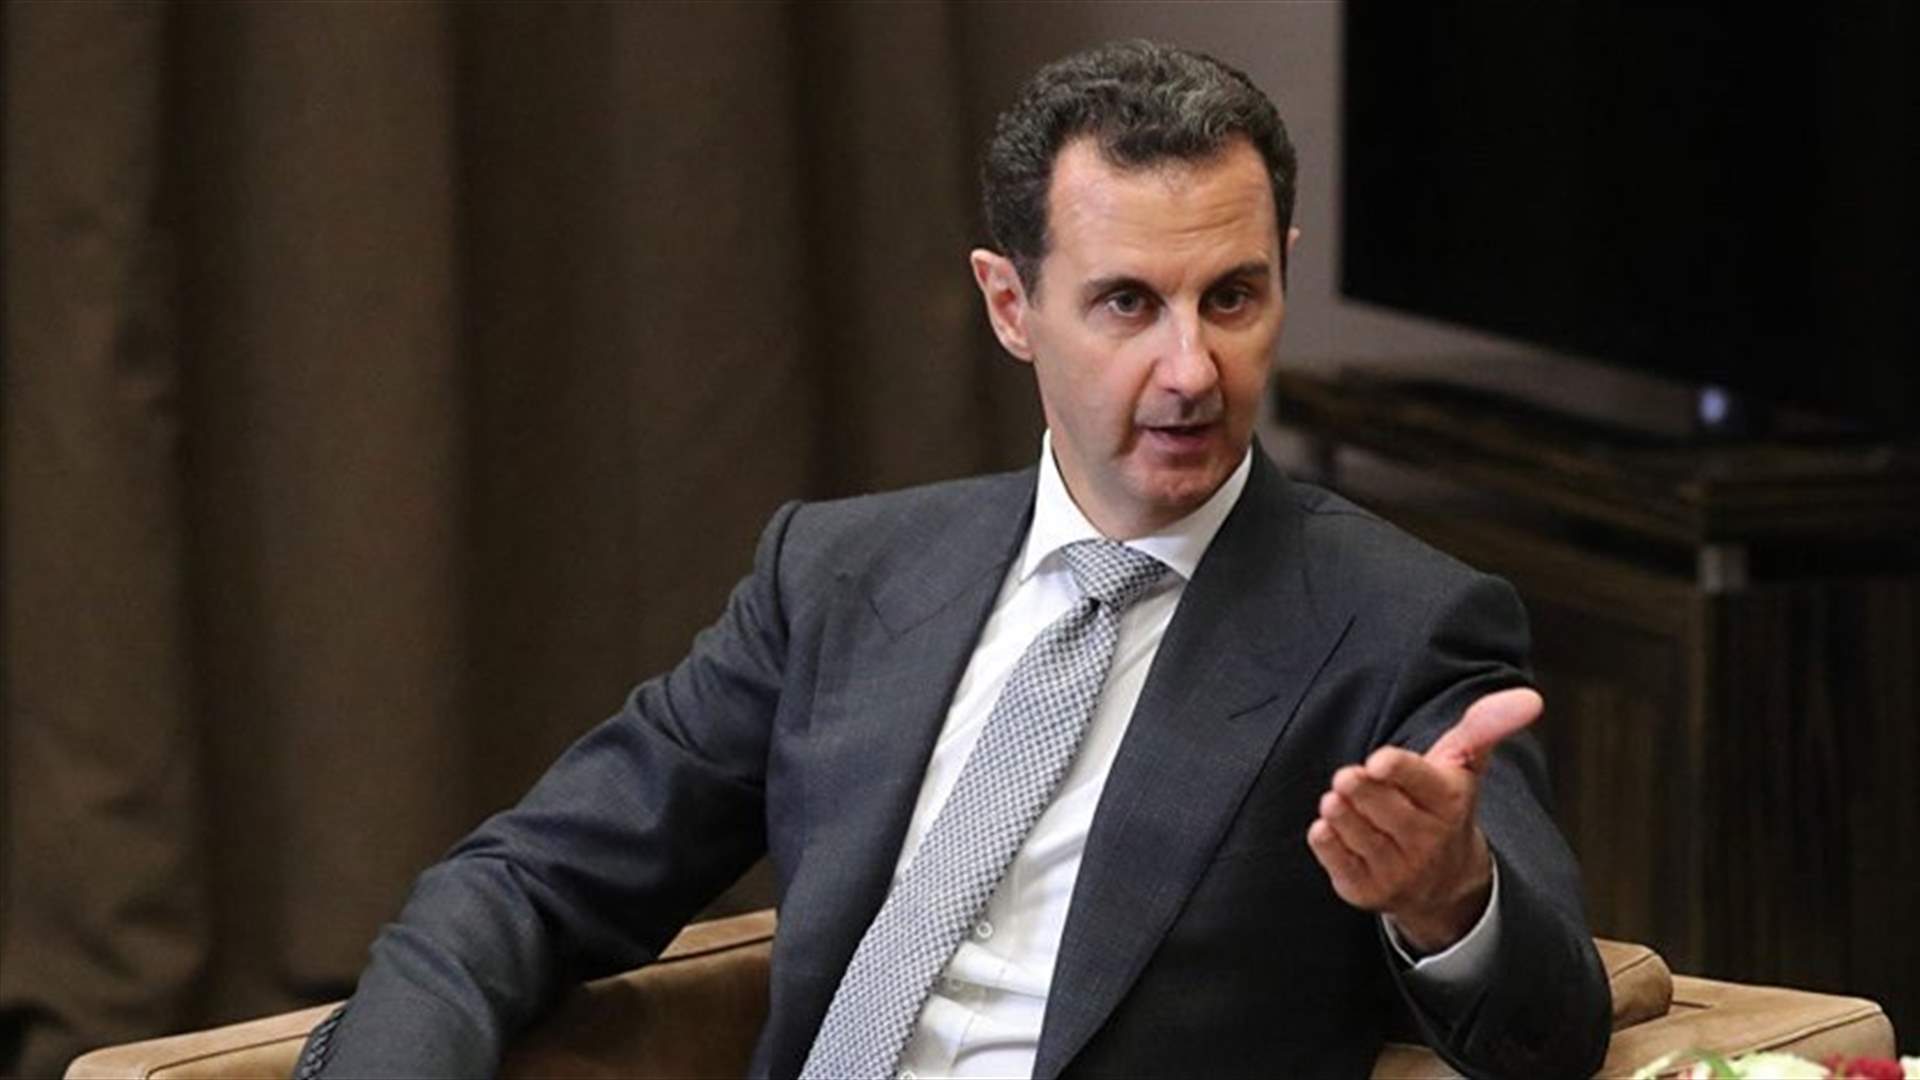 Bashar Assad comments on demonstrations in Lebanon and other states